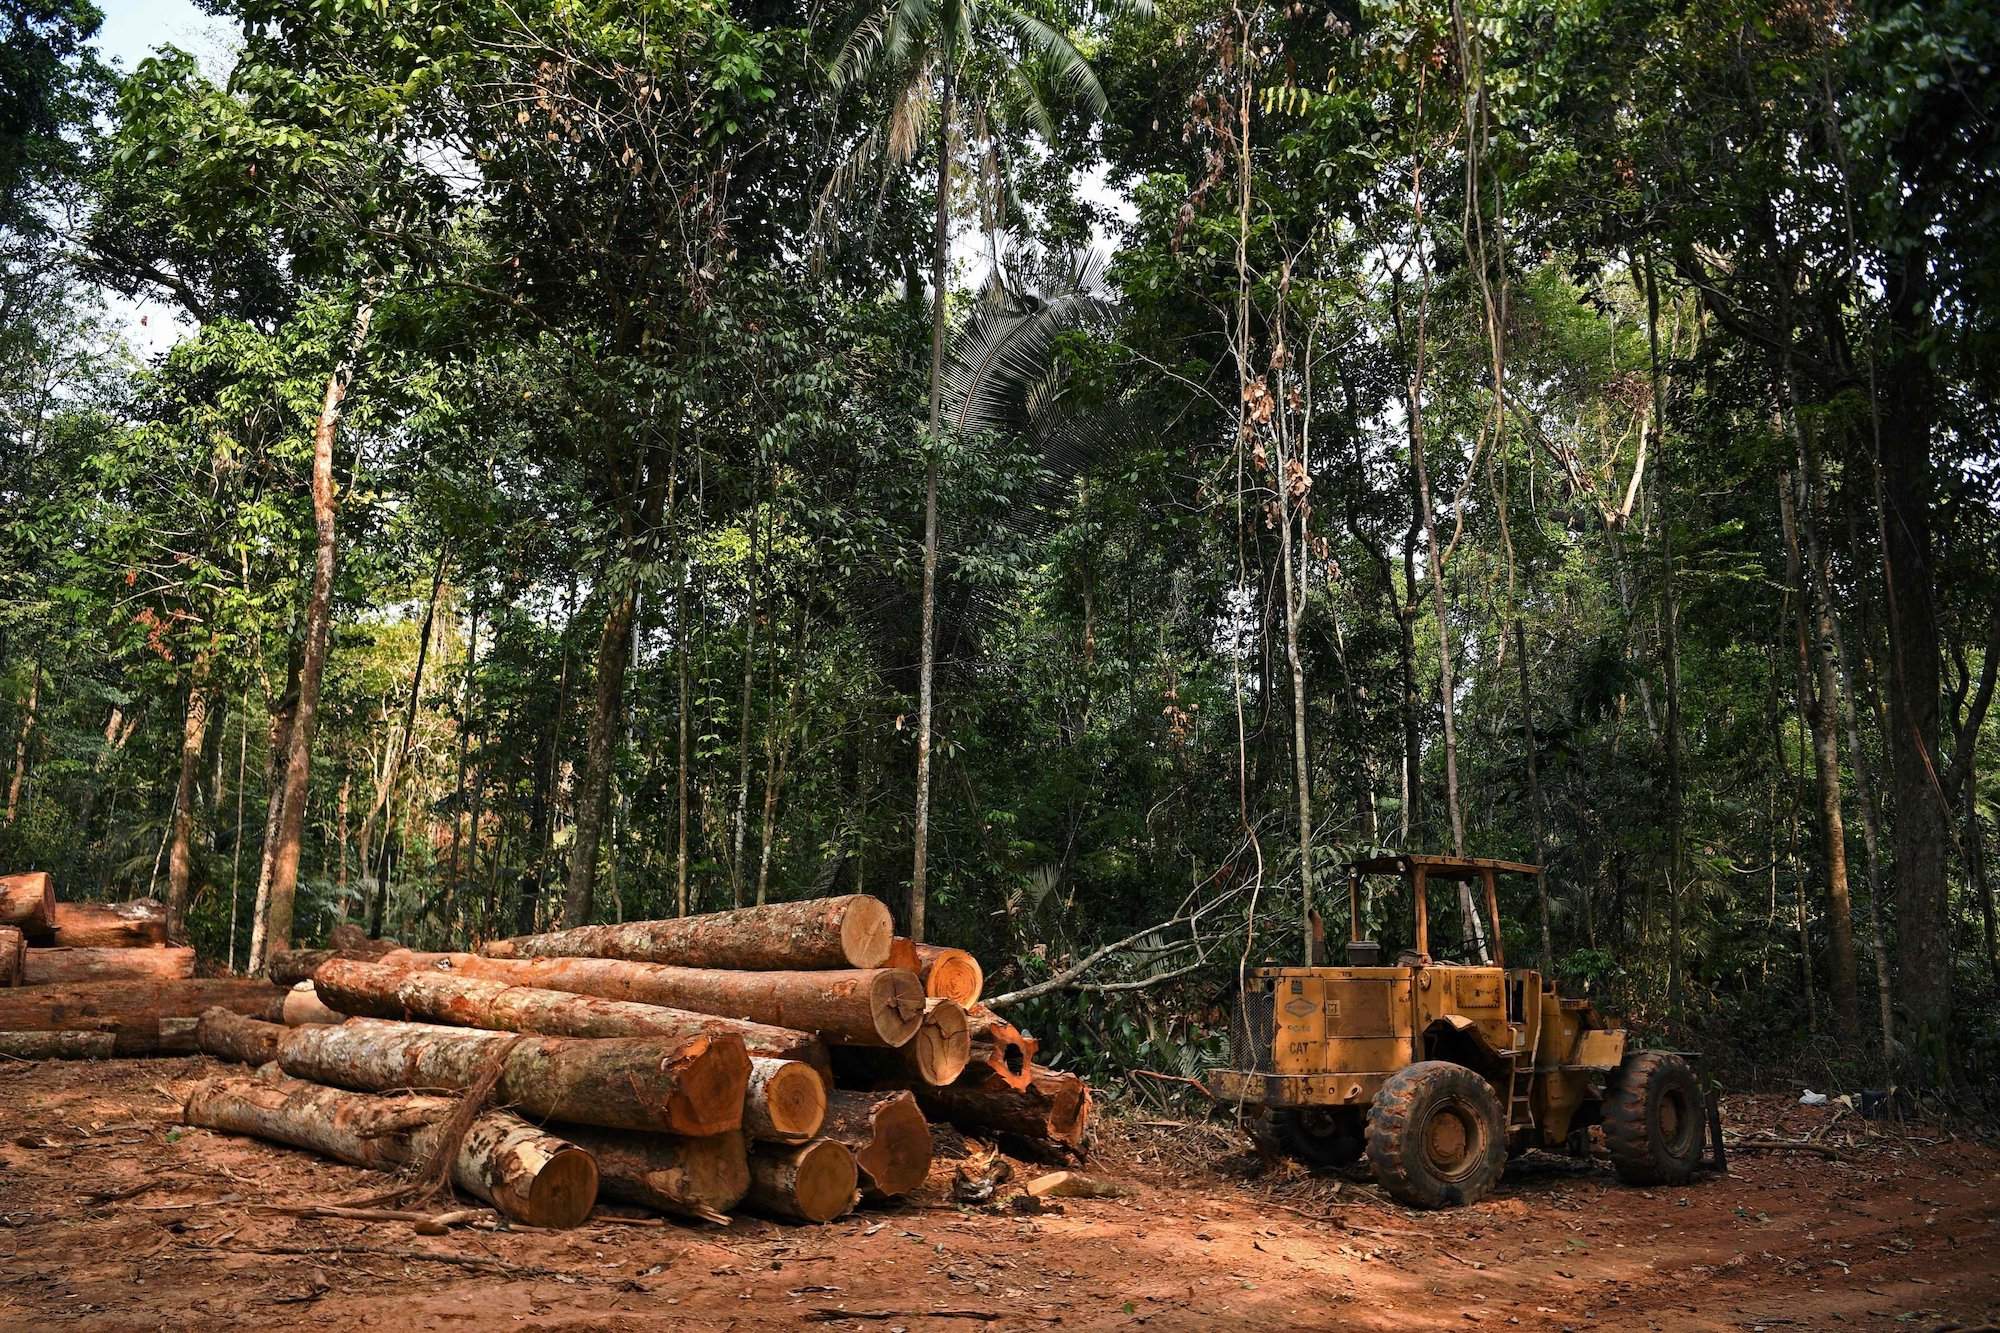 More than 20,500 kilometres of forest were lost in Brazil last year